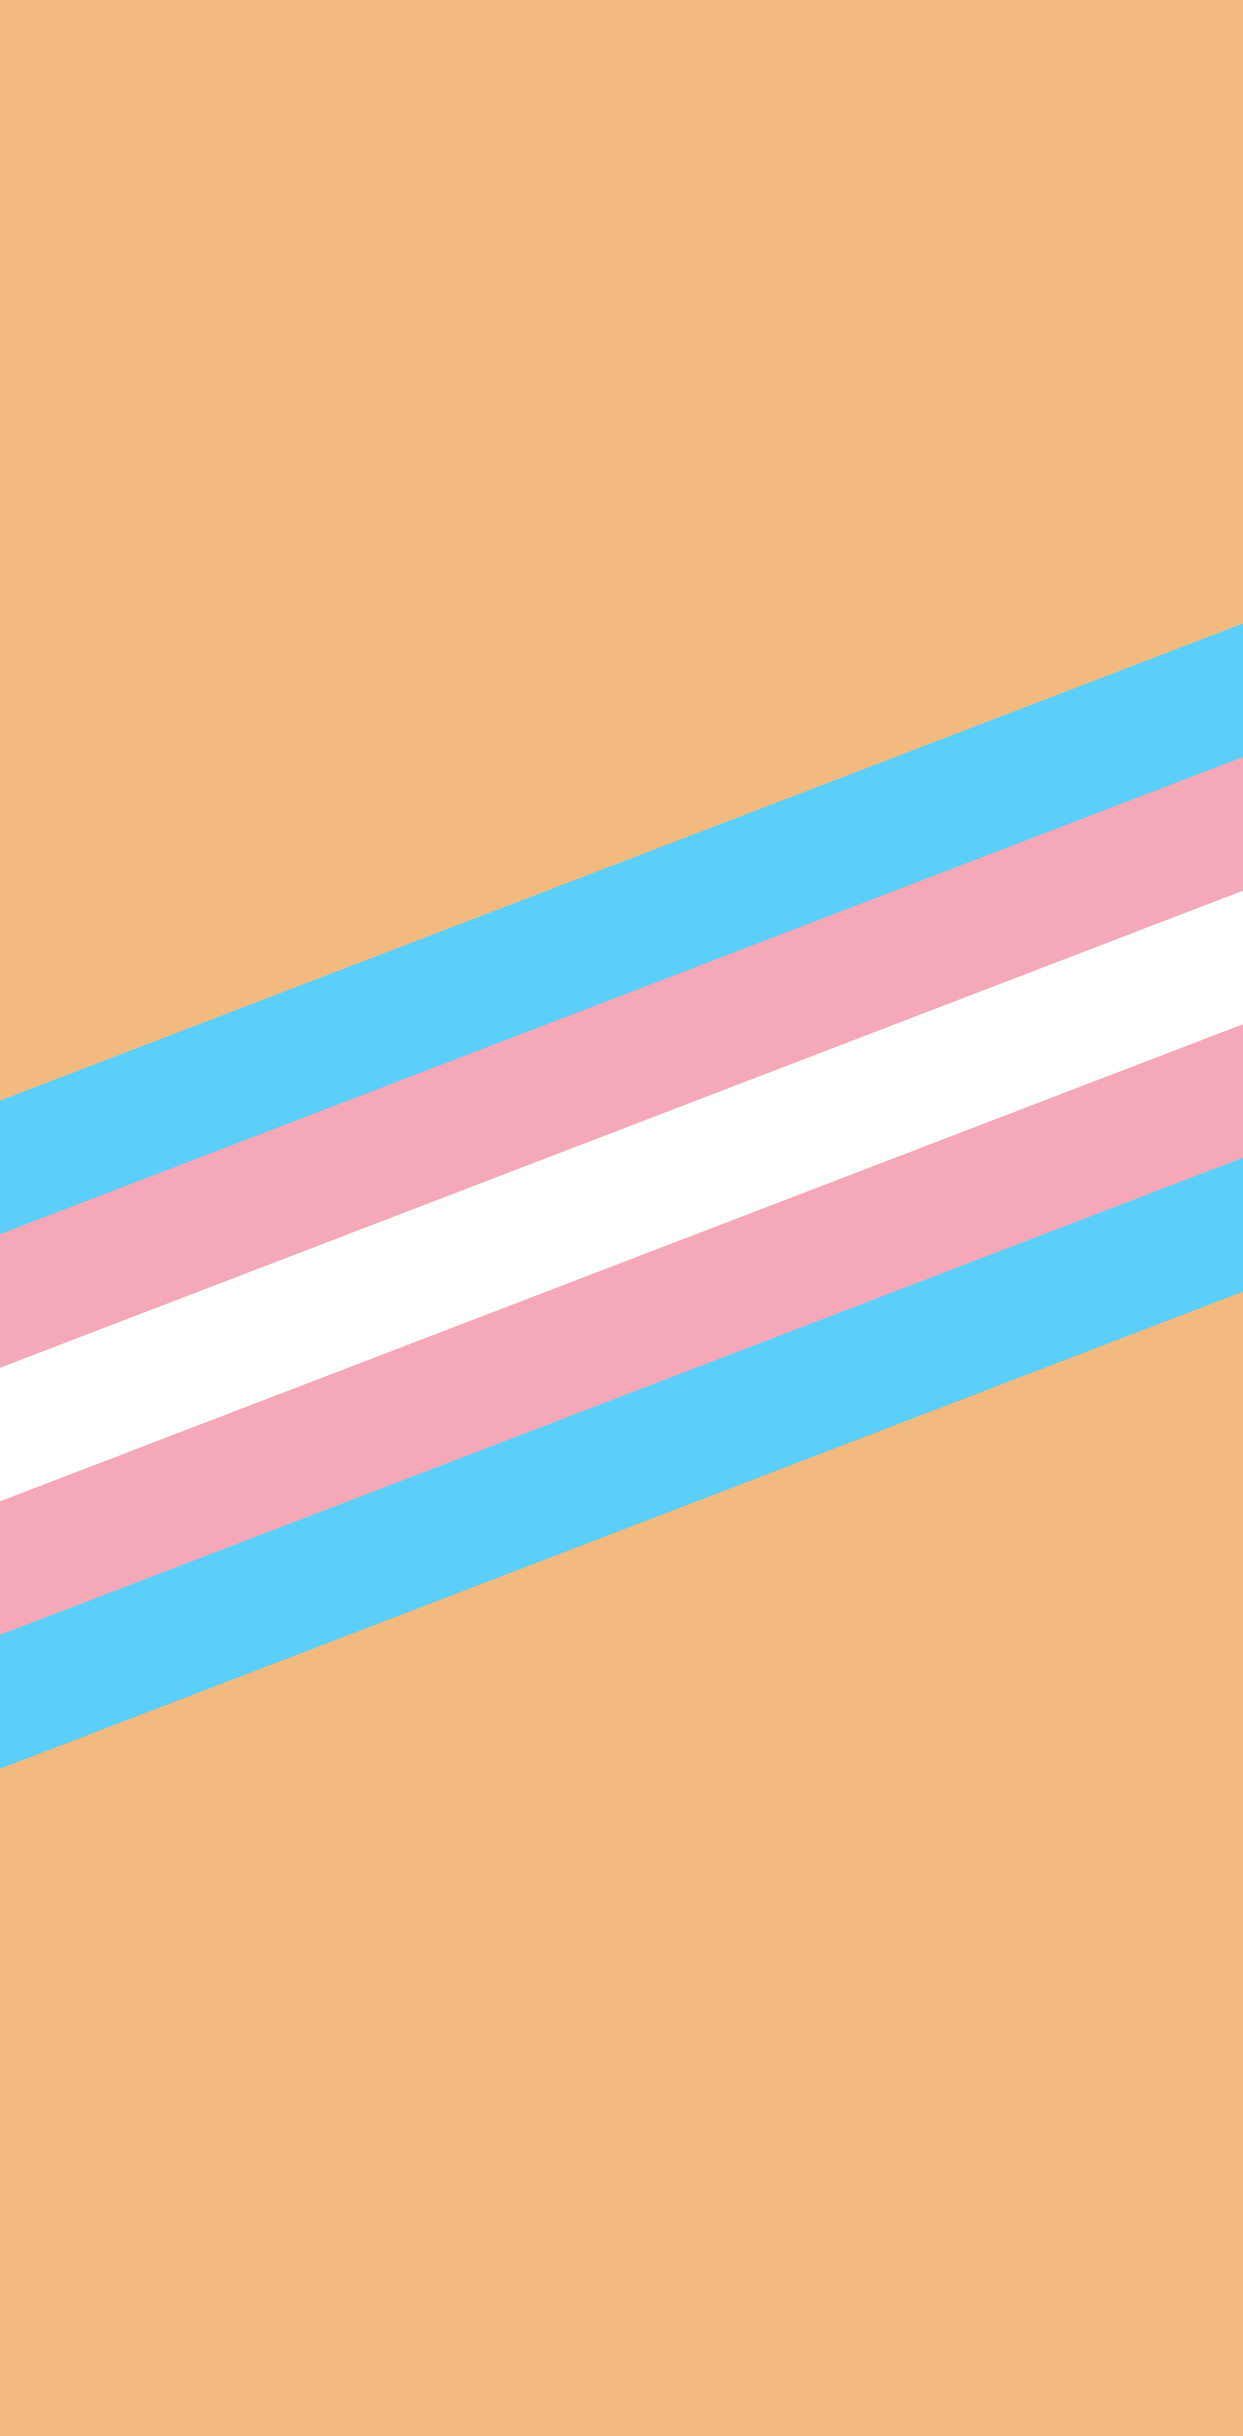 Trans Flag Wallpapers